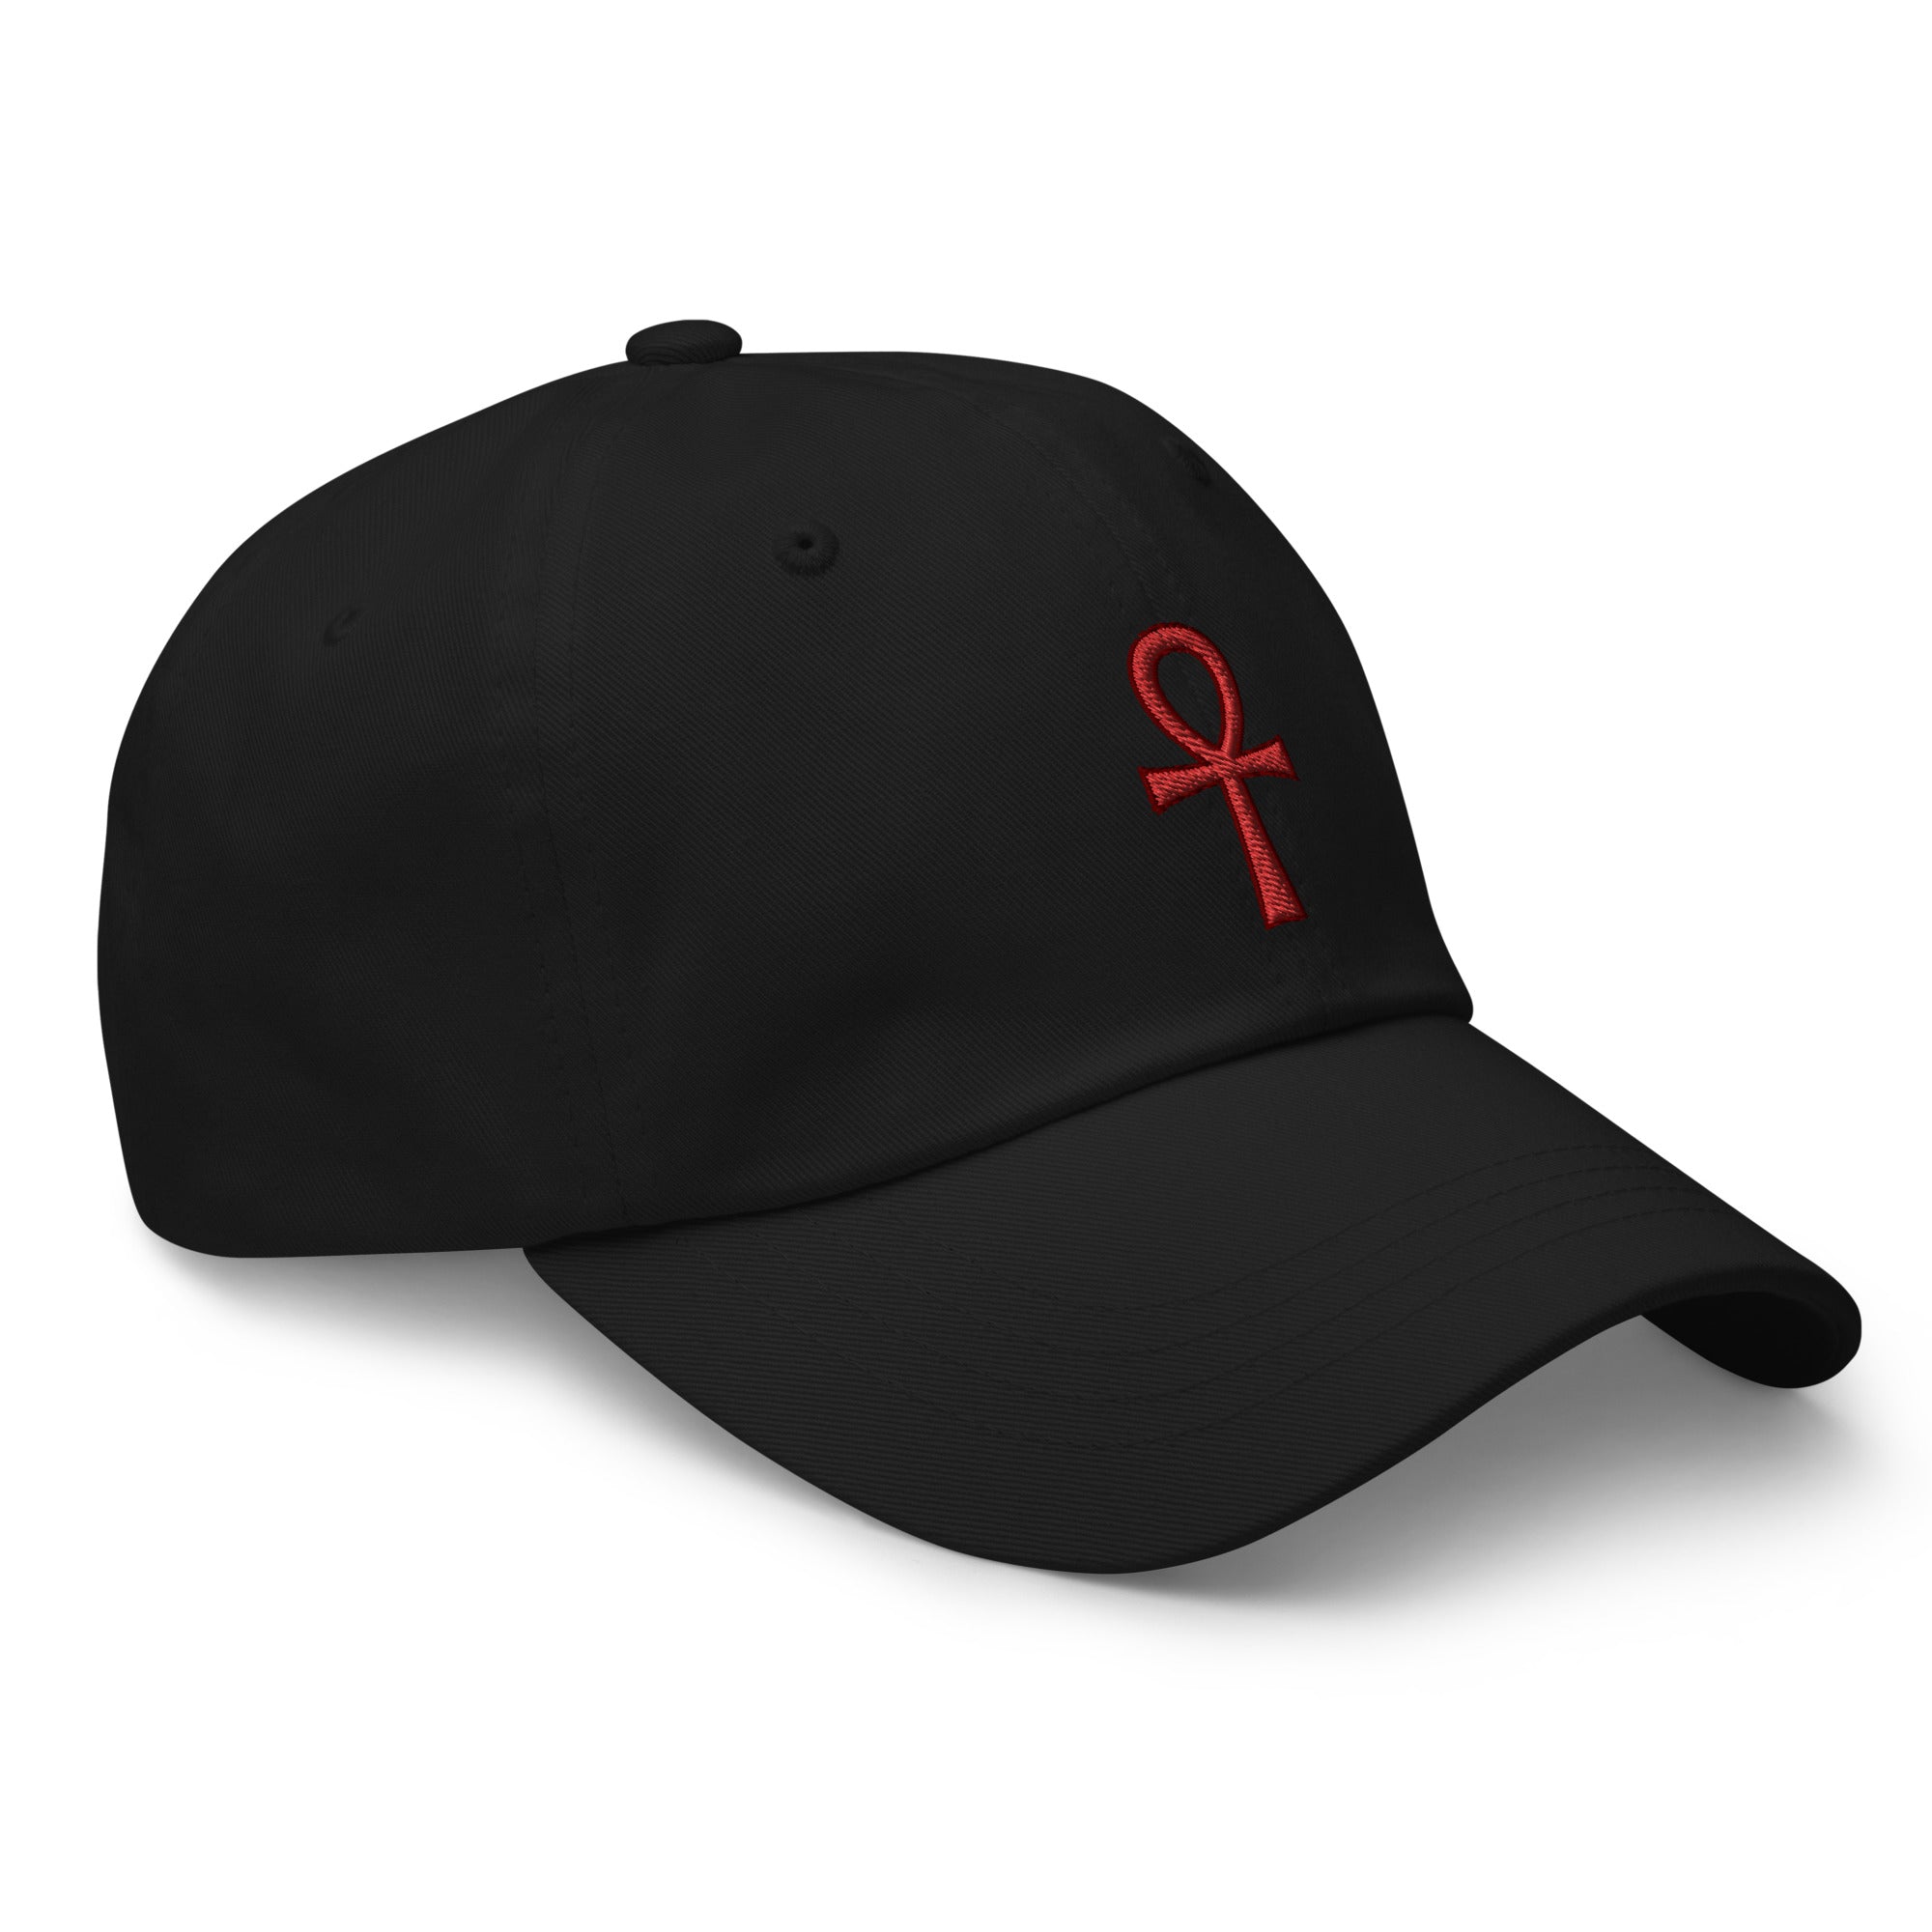 The Key of Life Ankh Ancient Egyptian Culture Embroidered Baseball Cap Dad hat Red Thread - Edge of Life Designs